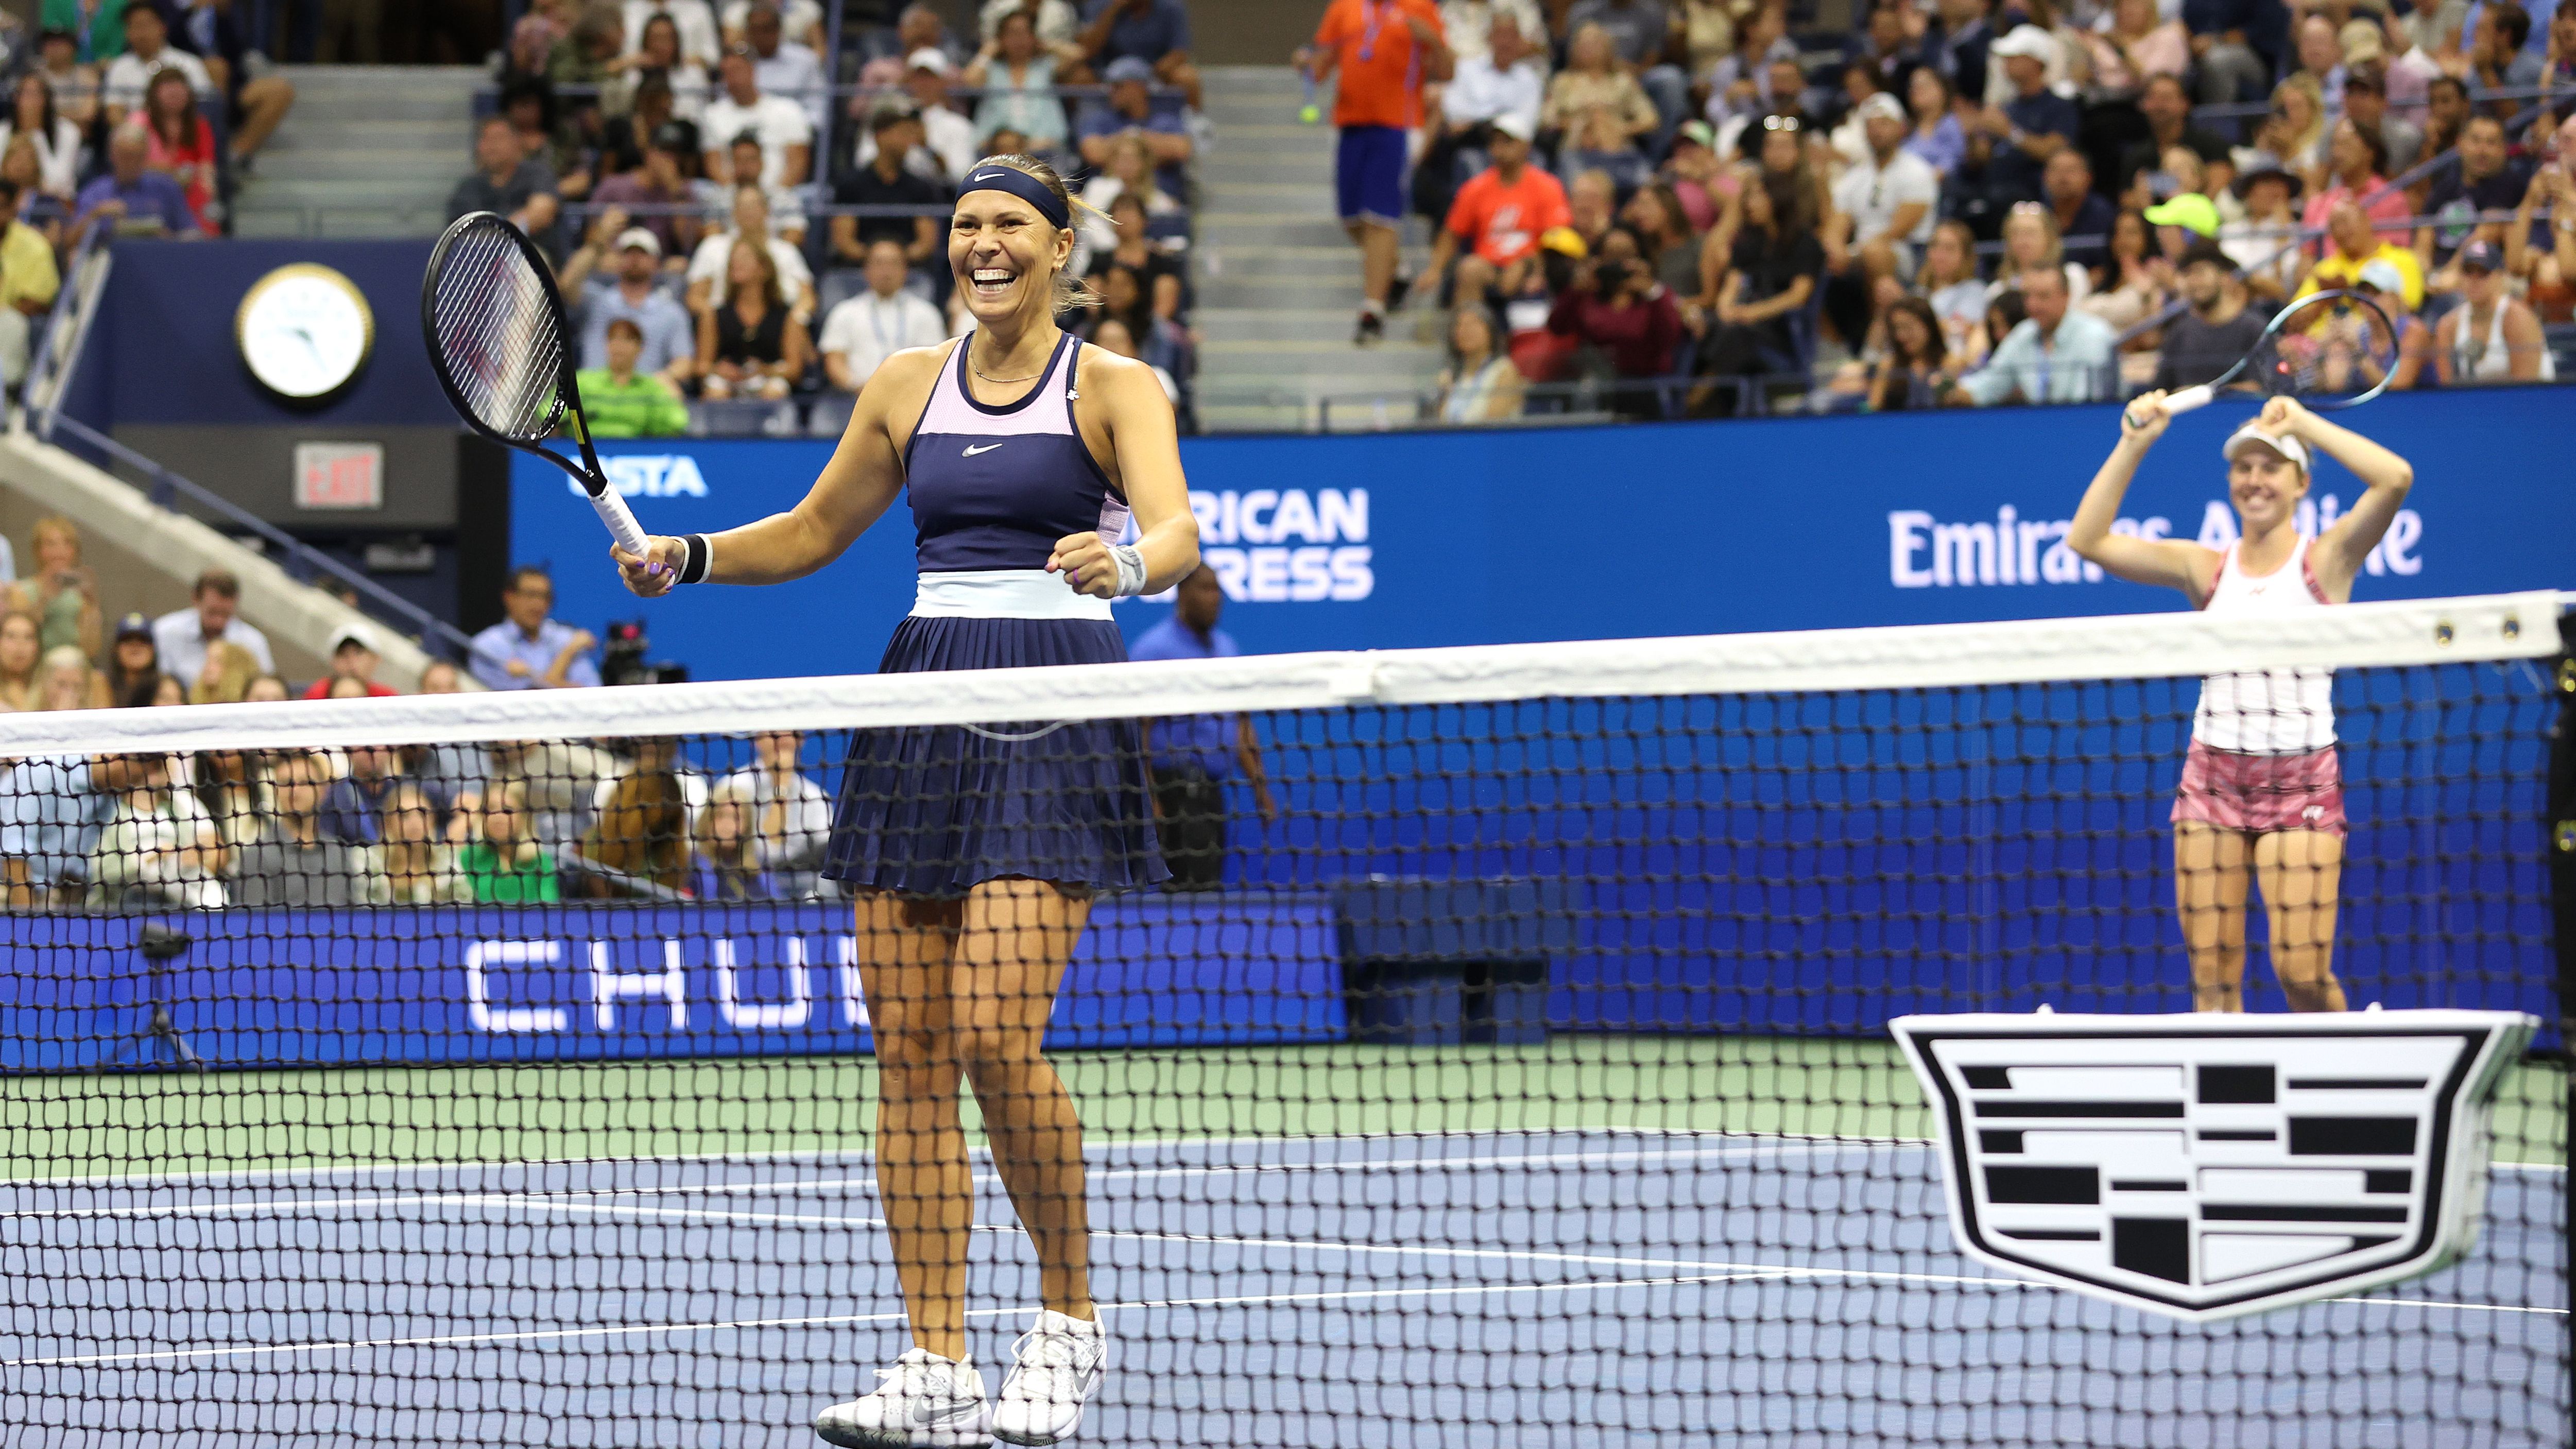 Lucie Hradecká, left, and Linda Nosková of the Czech Republic celebrate after their win over the Williams sisters.